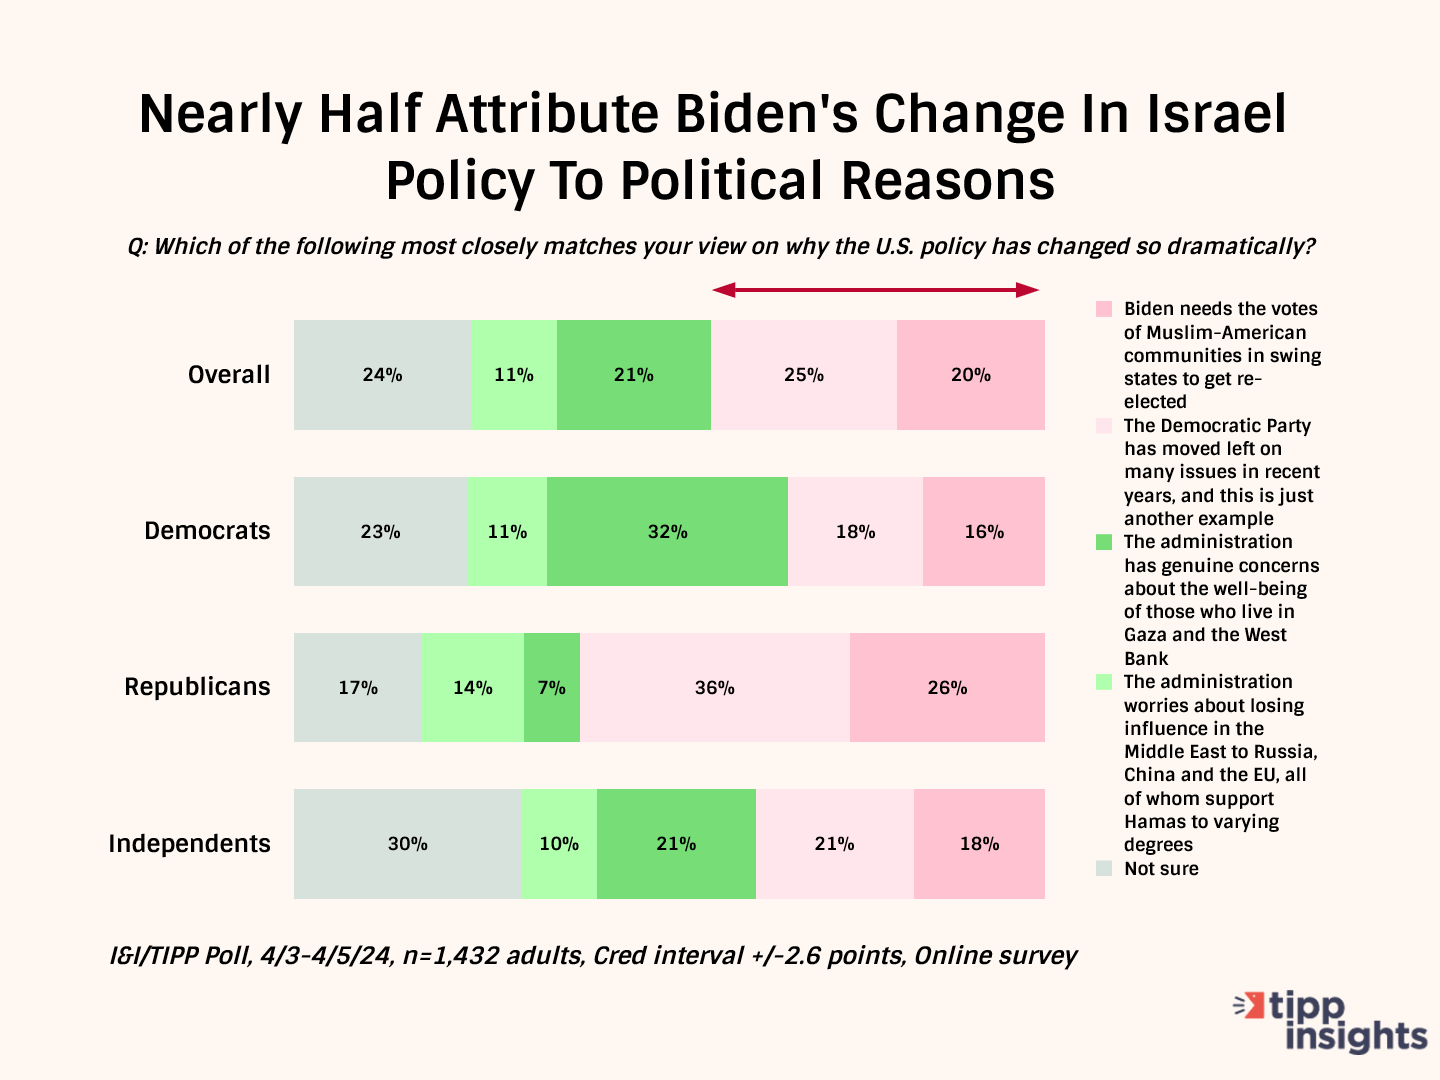 Will Israel Be A Game-Changer In The 2024 Election? I&I/TIPP Poll